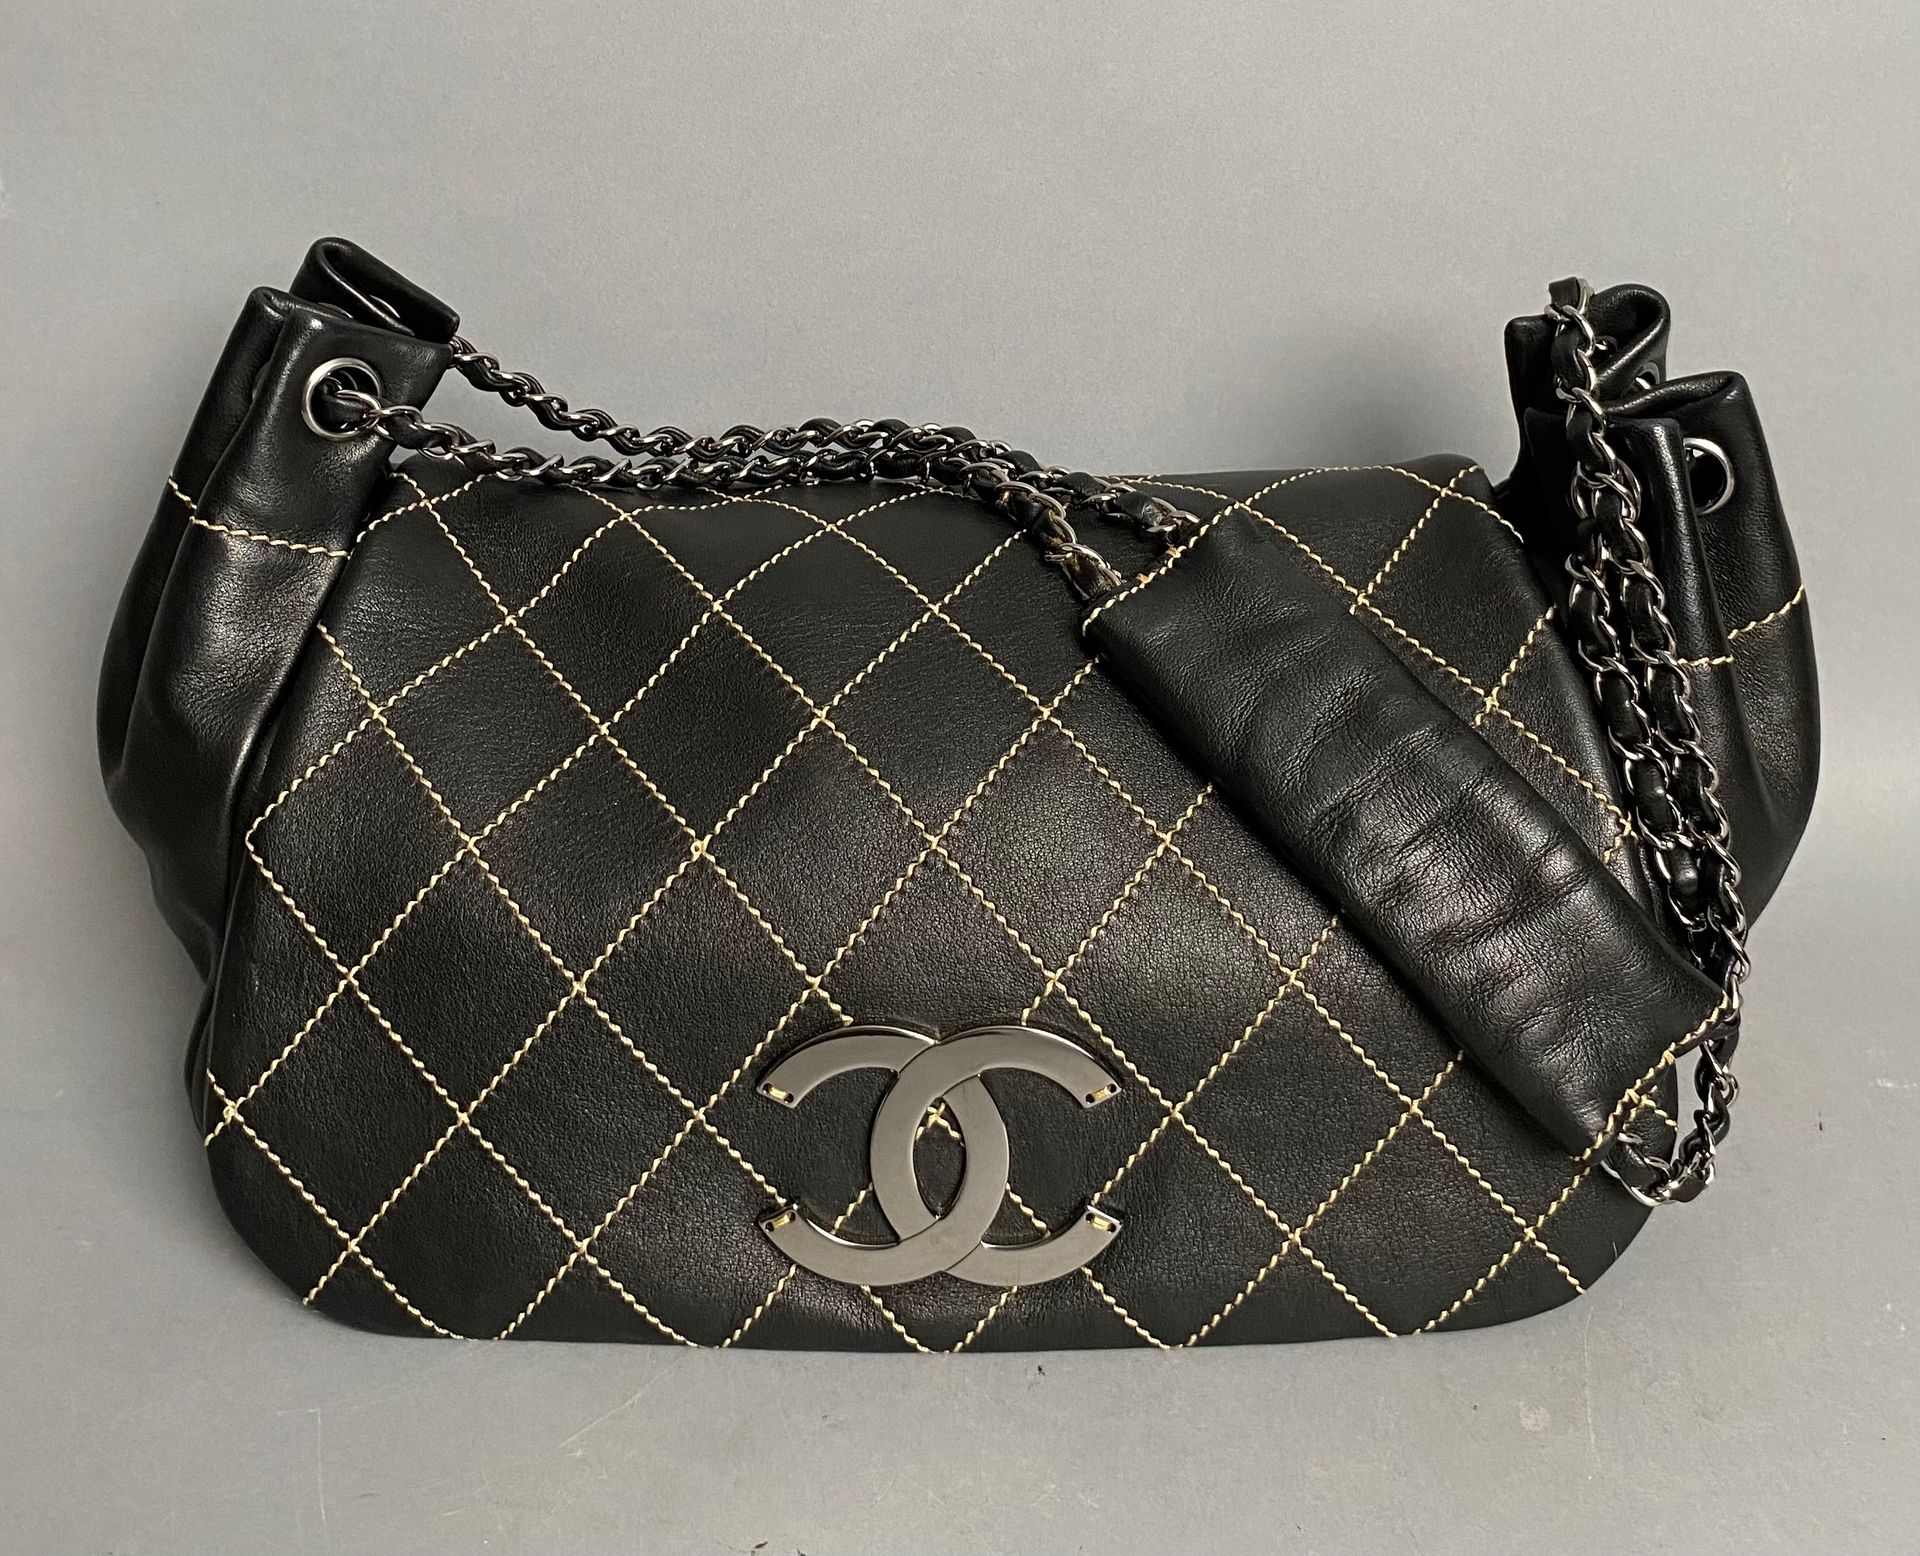 CHANEL. Shoulder bag in brown soft leather with checkerb…